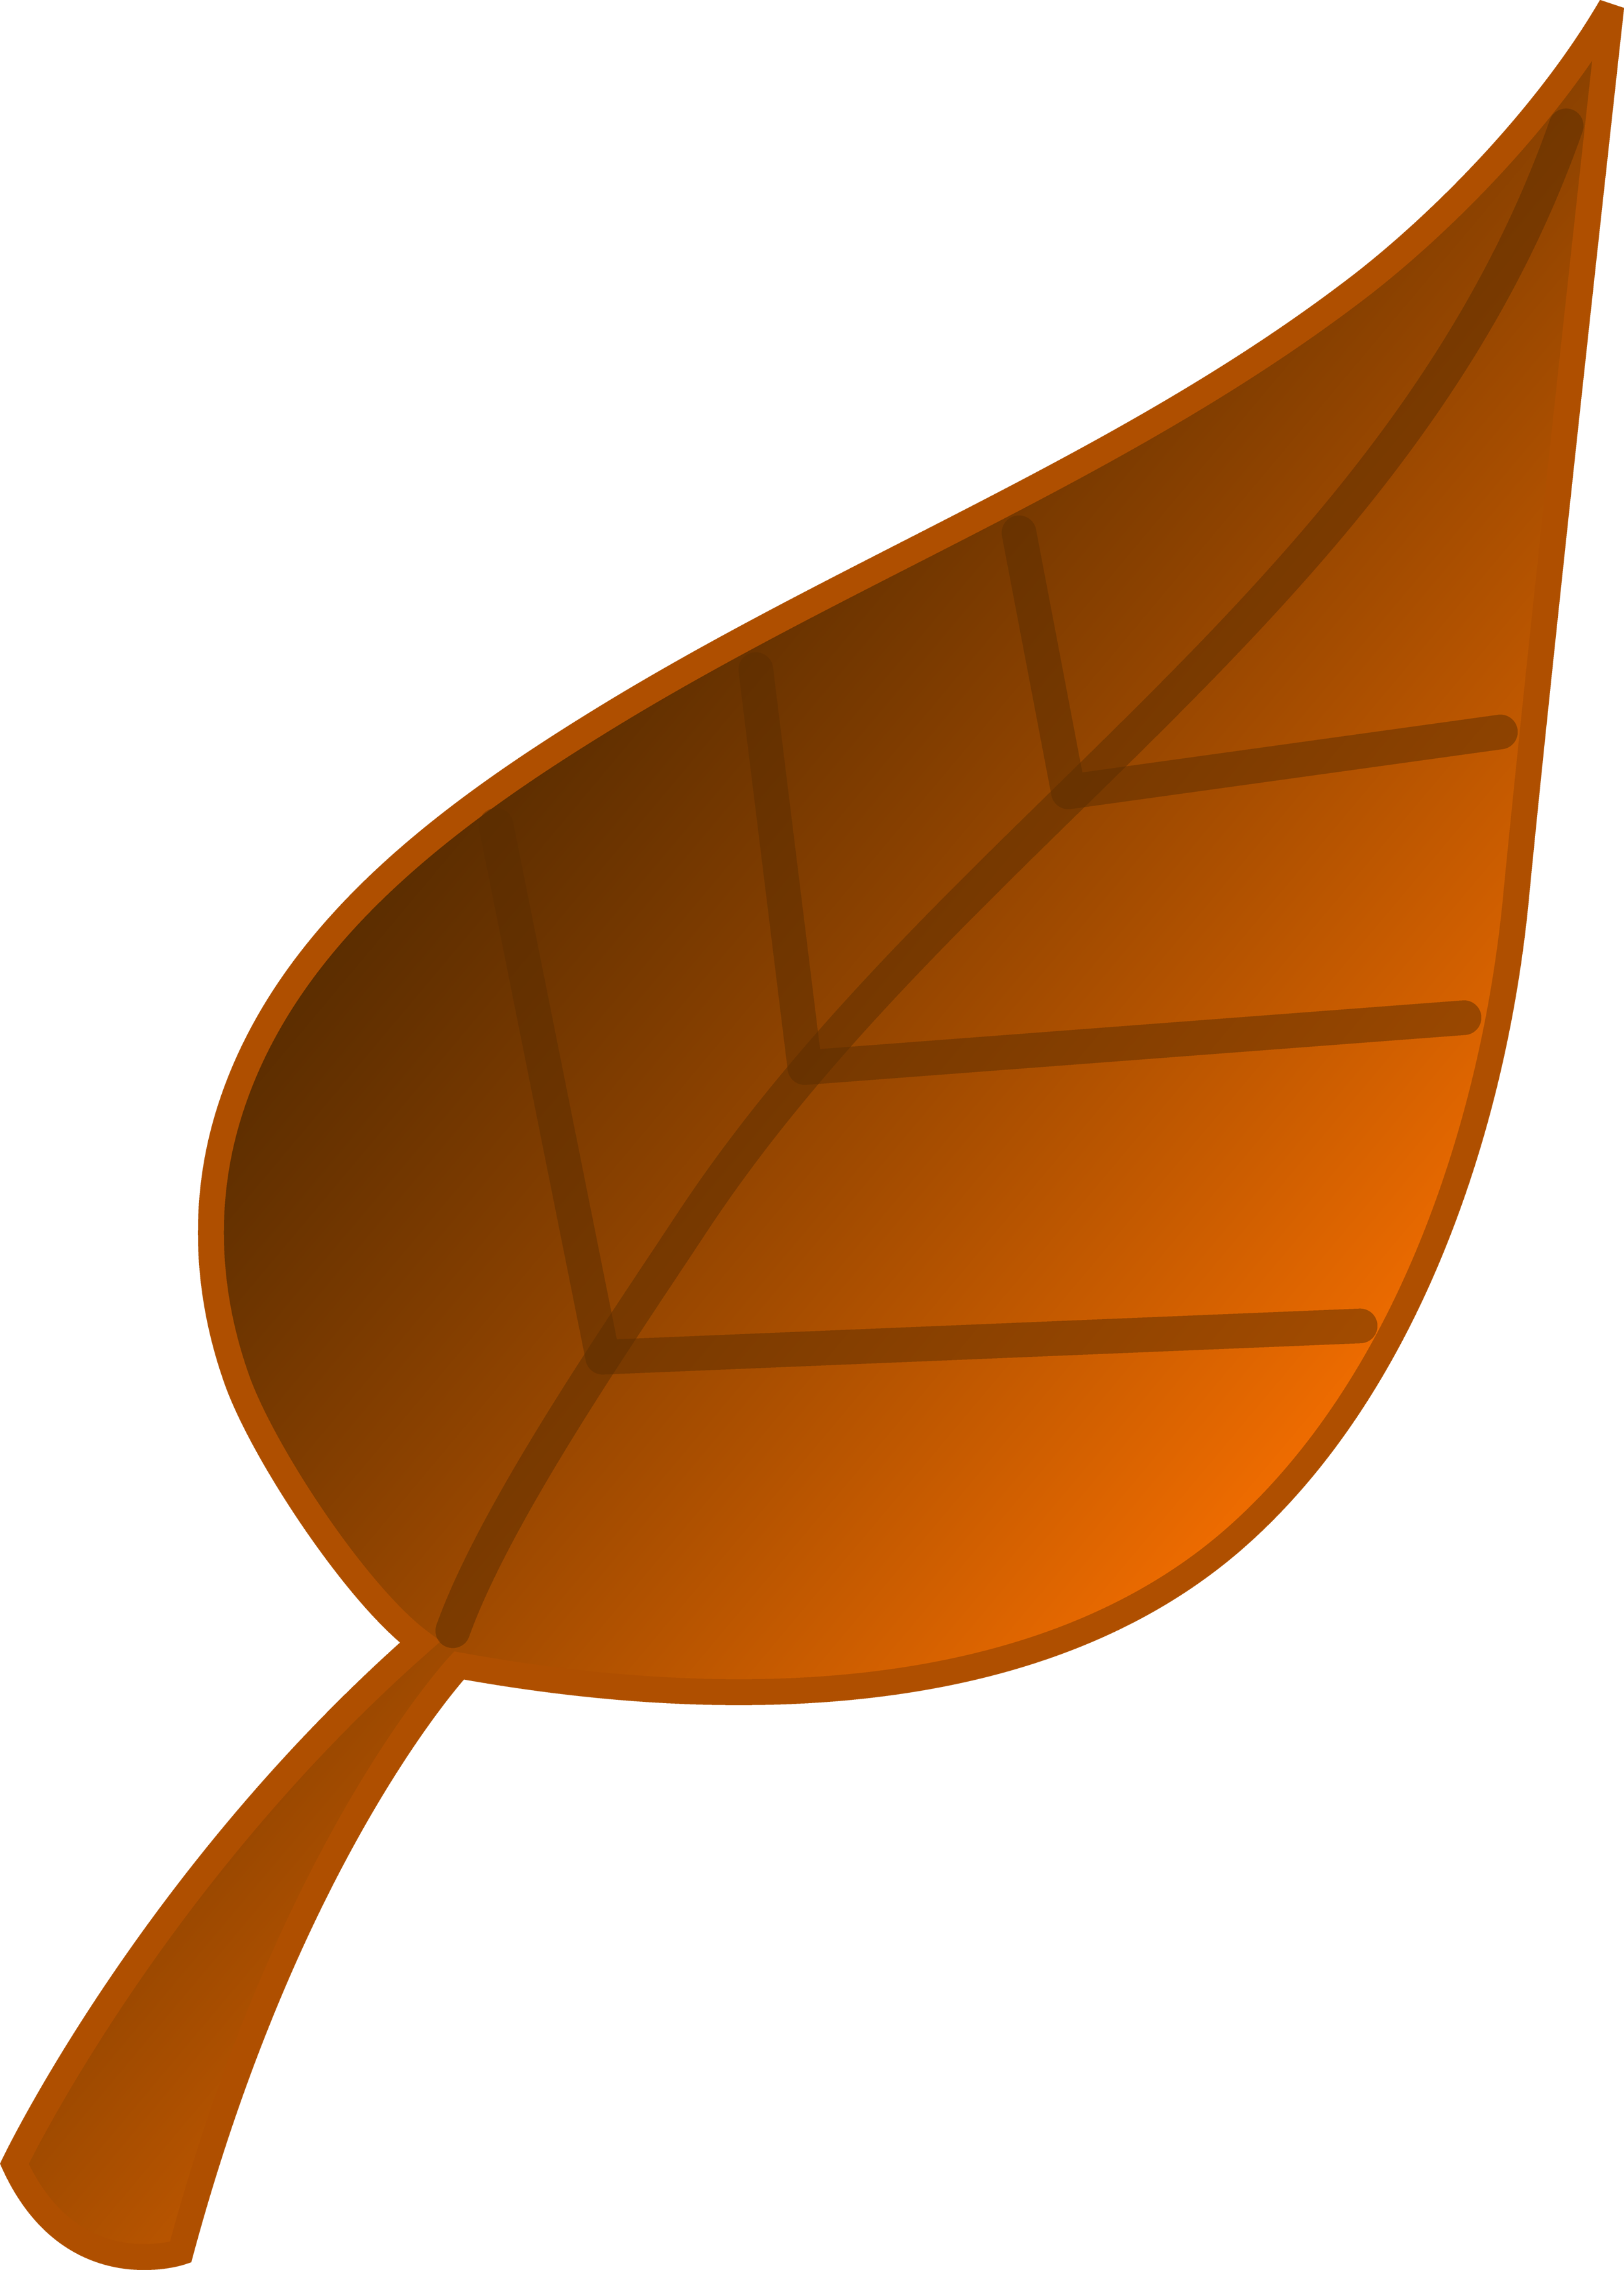 Leaves Cartoon | Free Download Clip Art | Free Clip Art | on ...